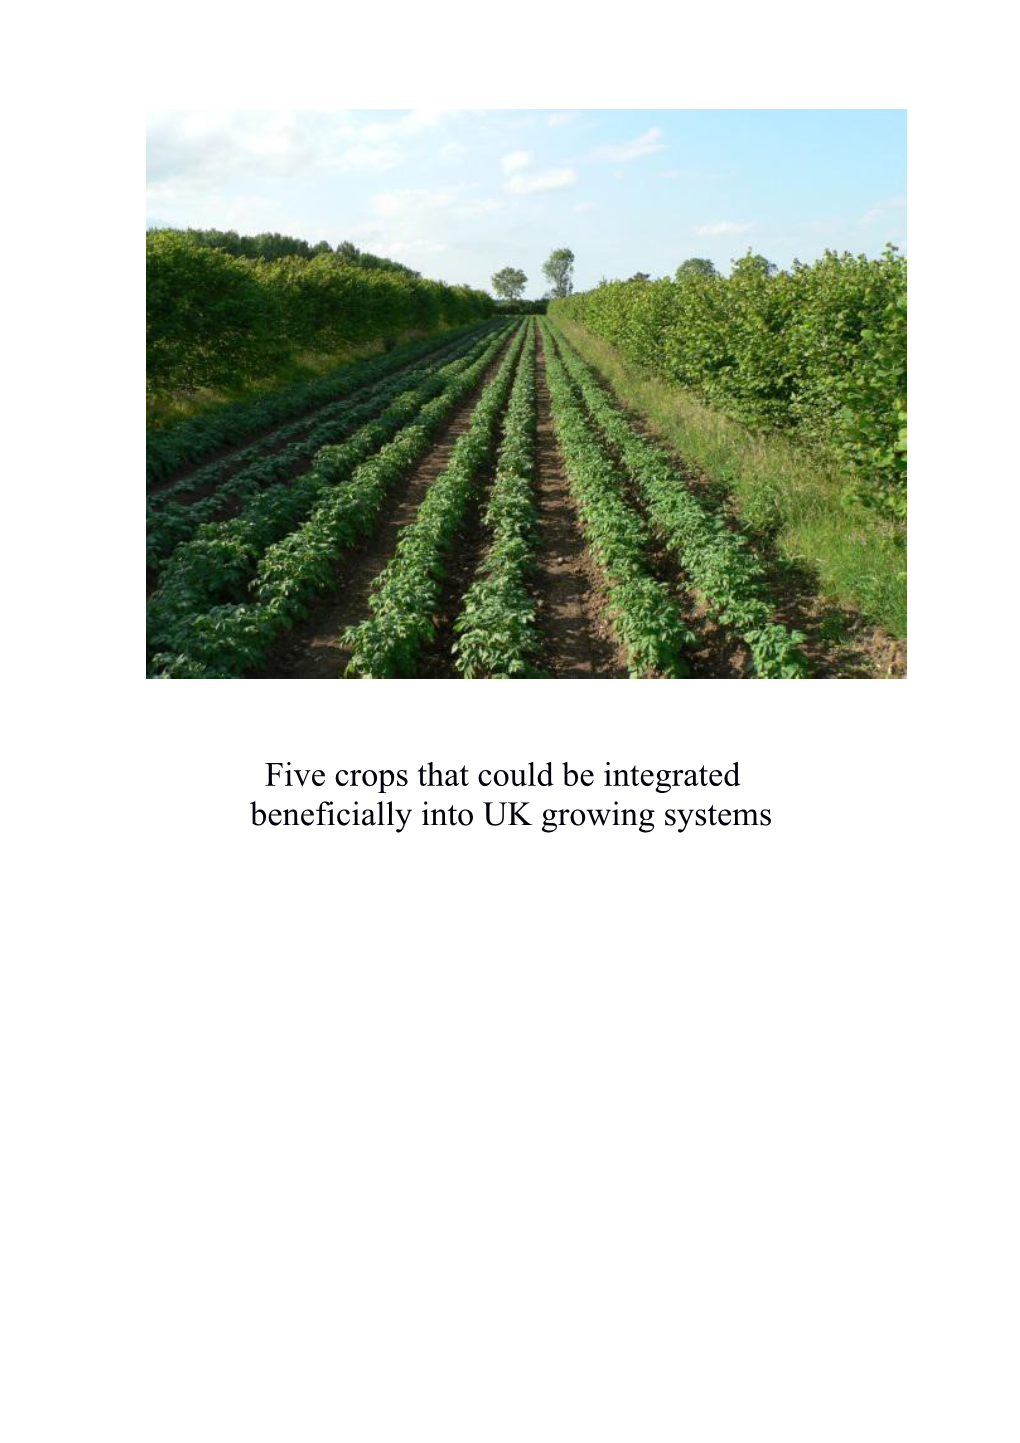 Five Crops That Could Be Integrated Beneficially Into UK Growing Systems This Document Has Been Written with the Help of Many People